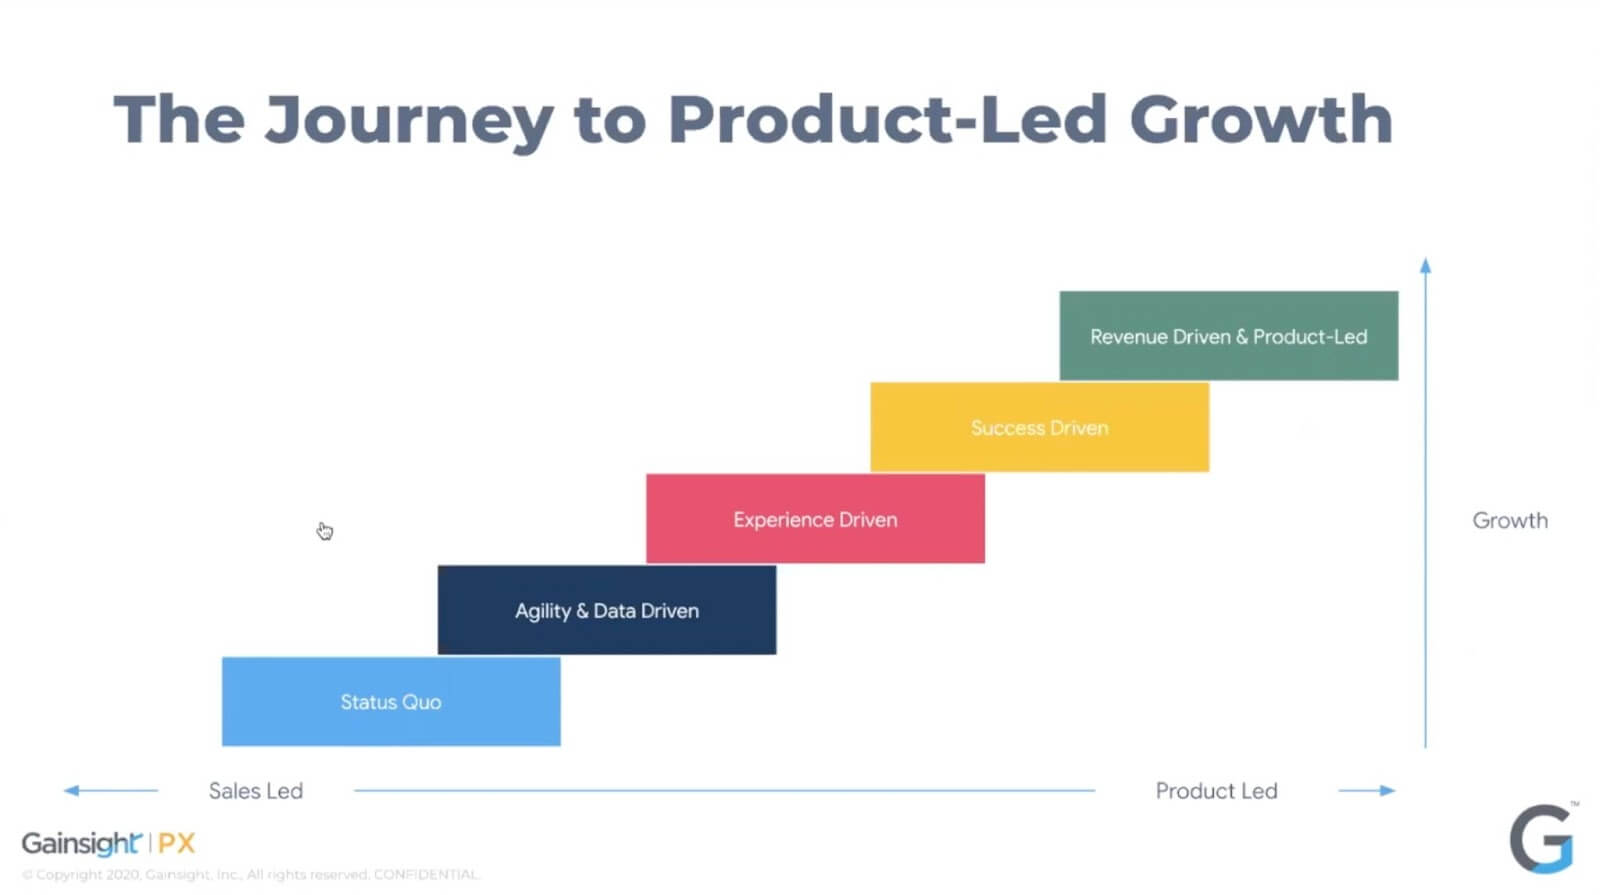 A graph showing the journey to product-led growth